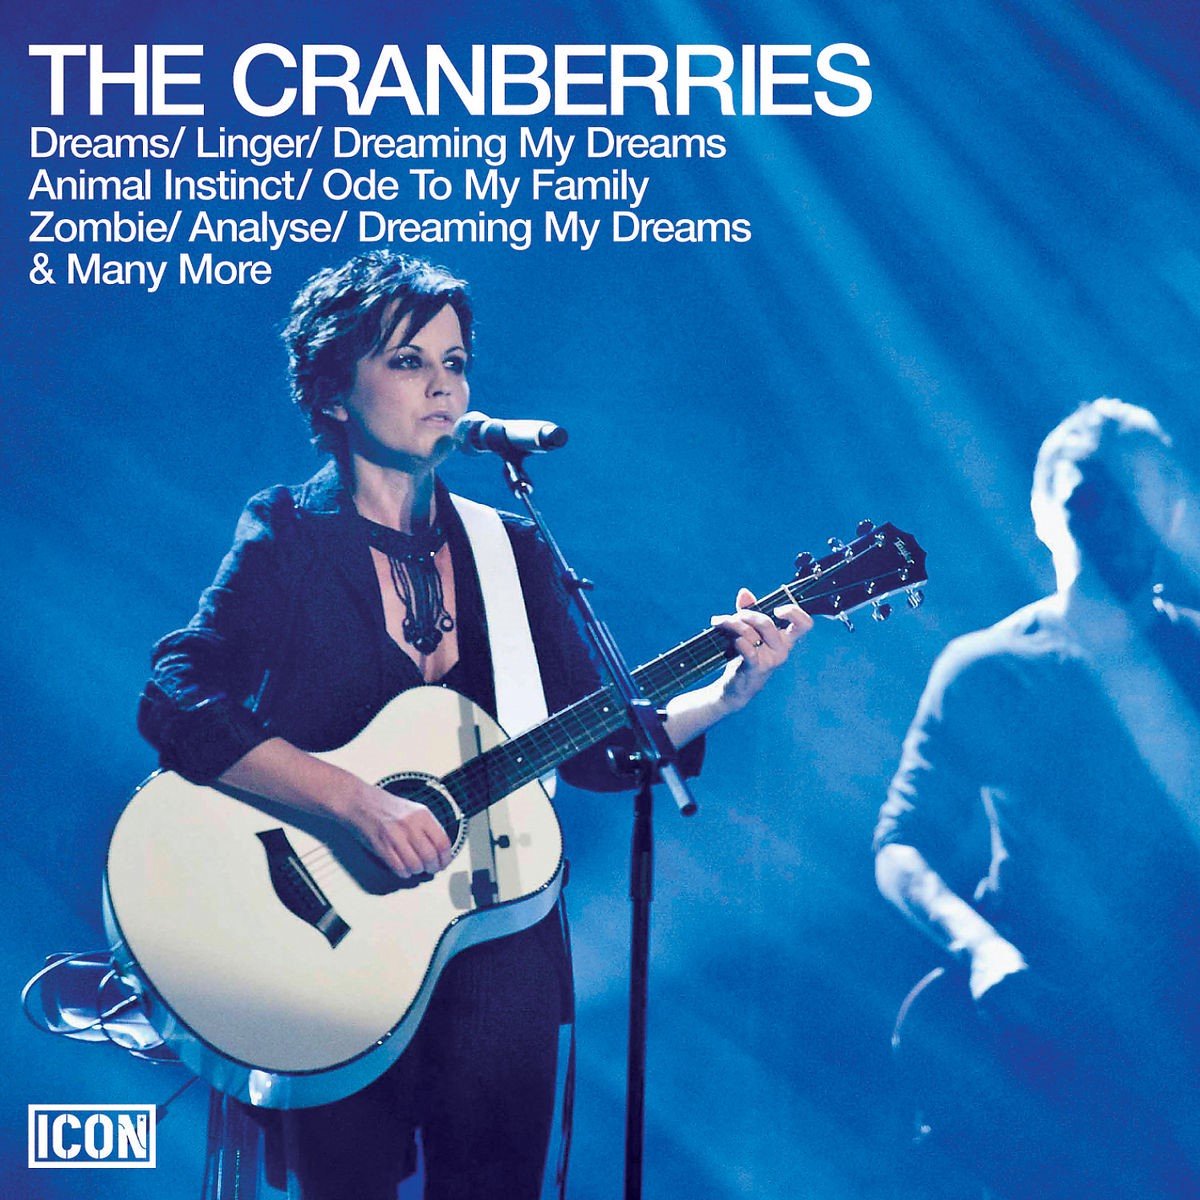 The Cranberries - Icon (CD) - the Cranberries